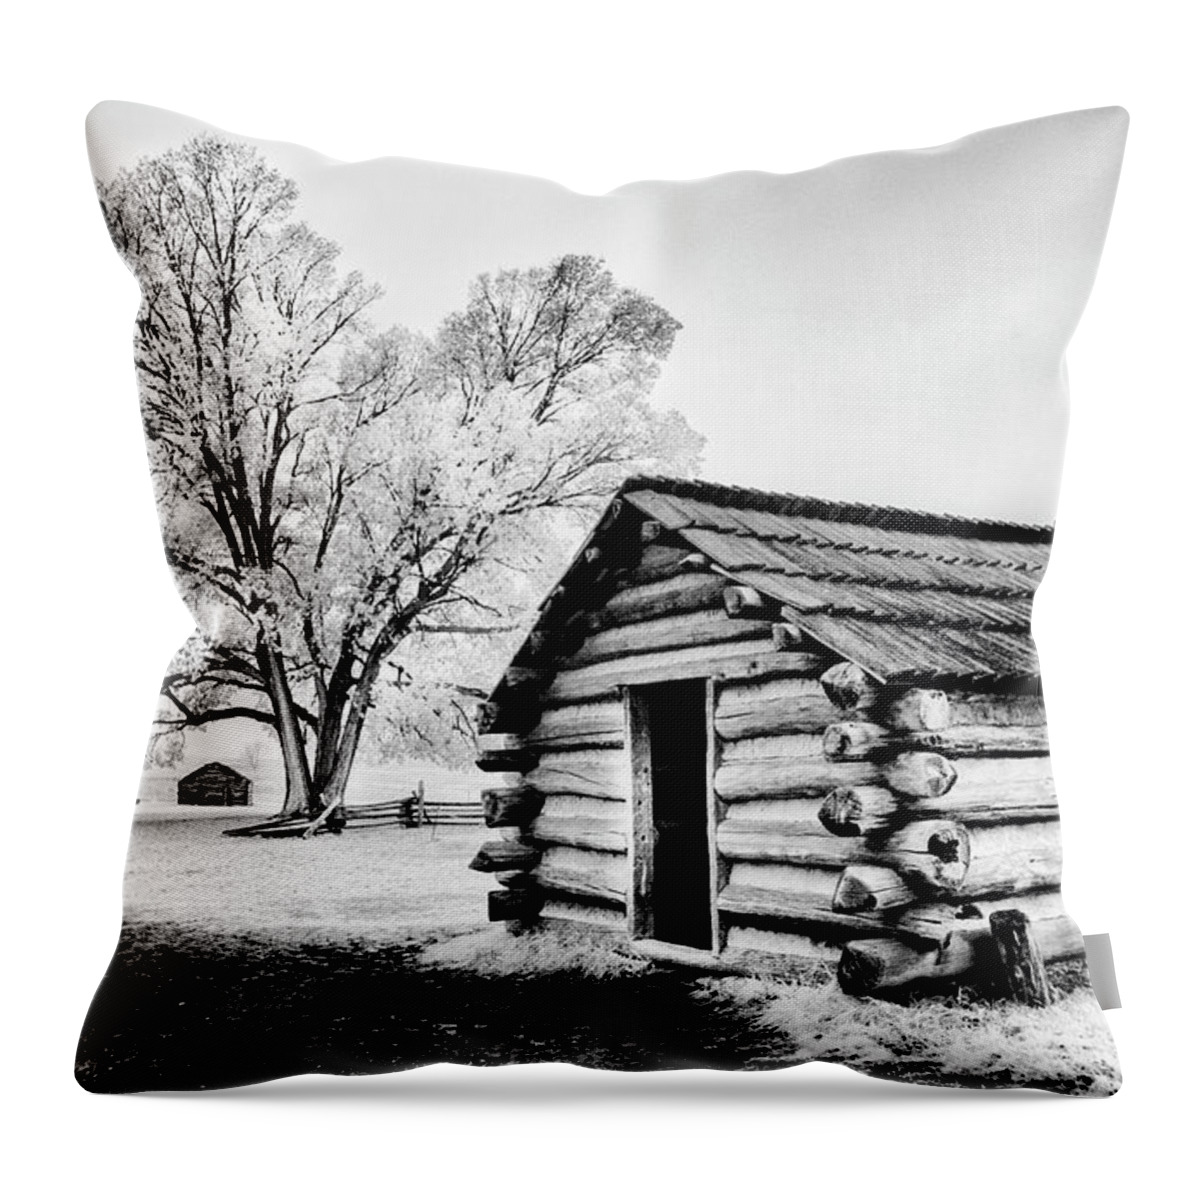 Early American Throw Pillow featuring the photograph Valley Forge Winter Troops Hut              by Paul W Faust - Impressions of Light